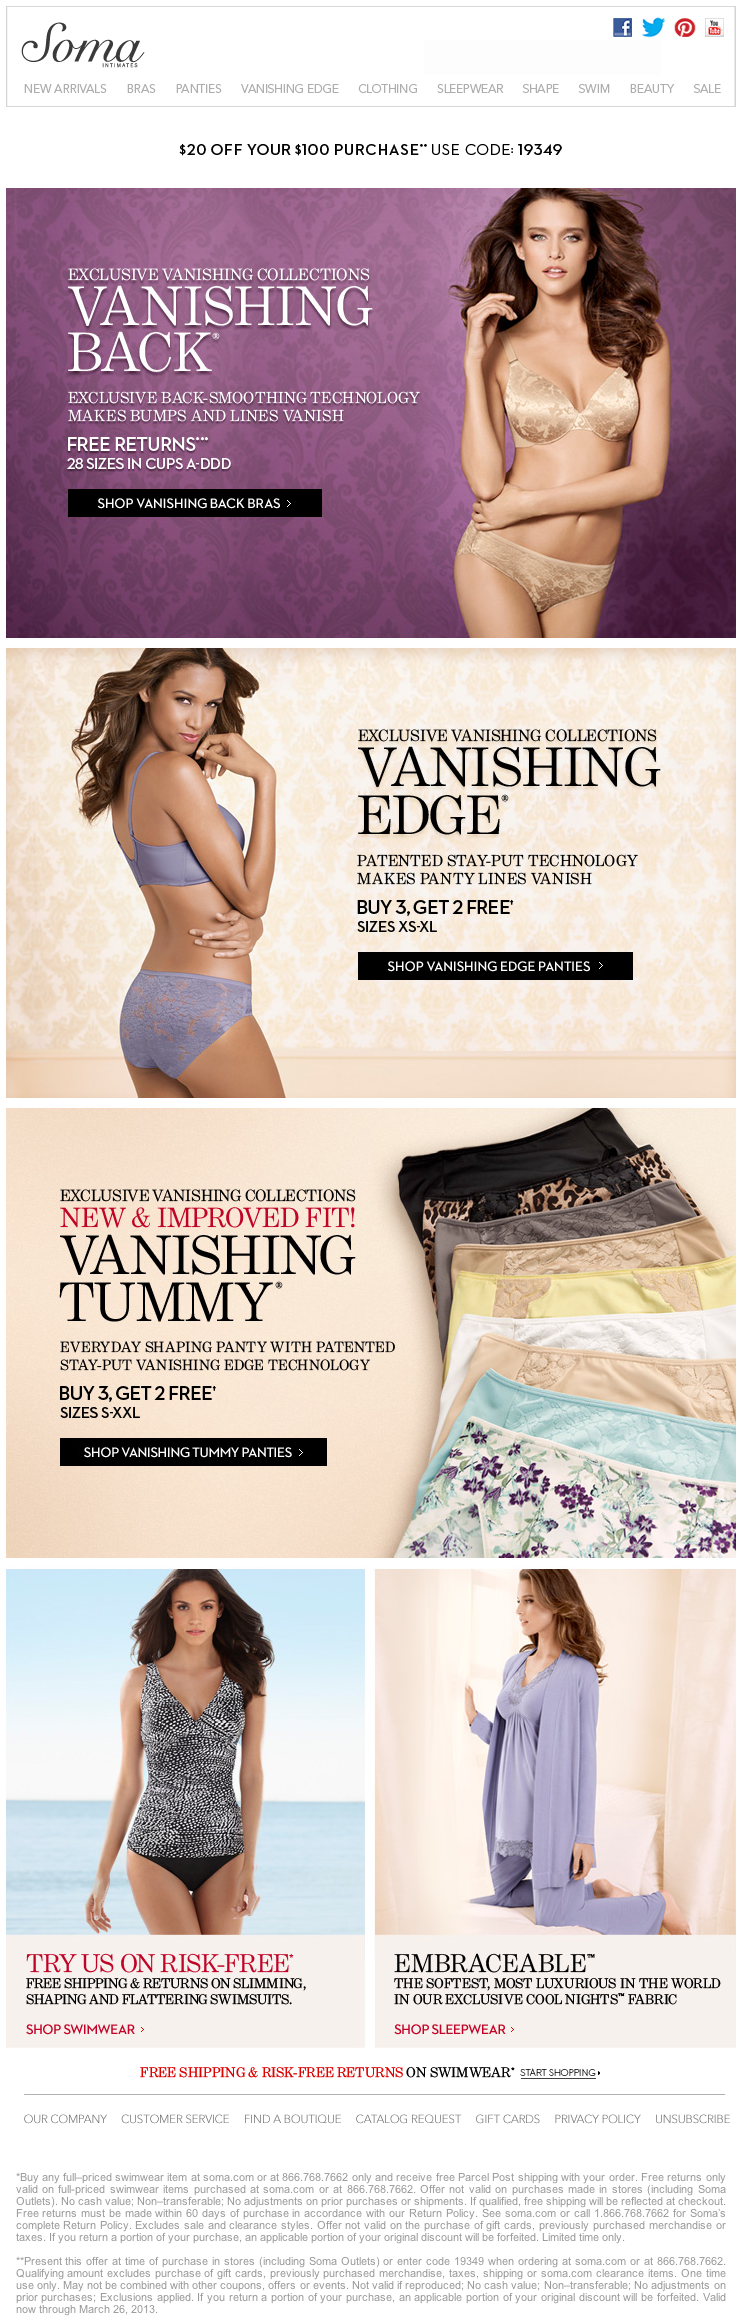 Soma Intimates Promo Coupon Codes and Printable Coupons